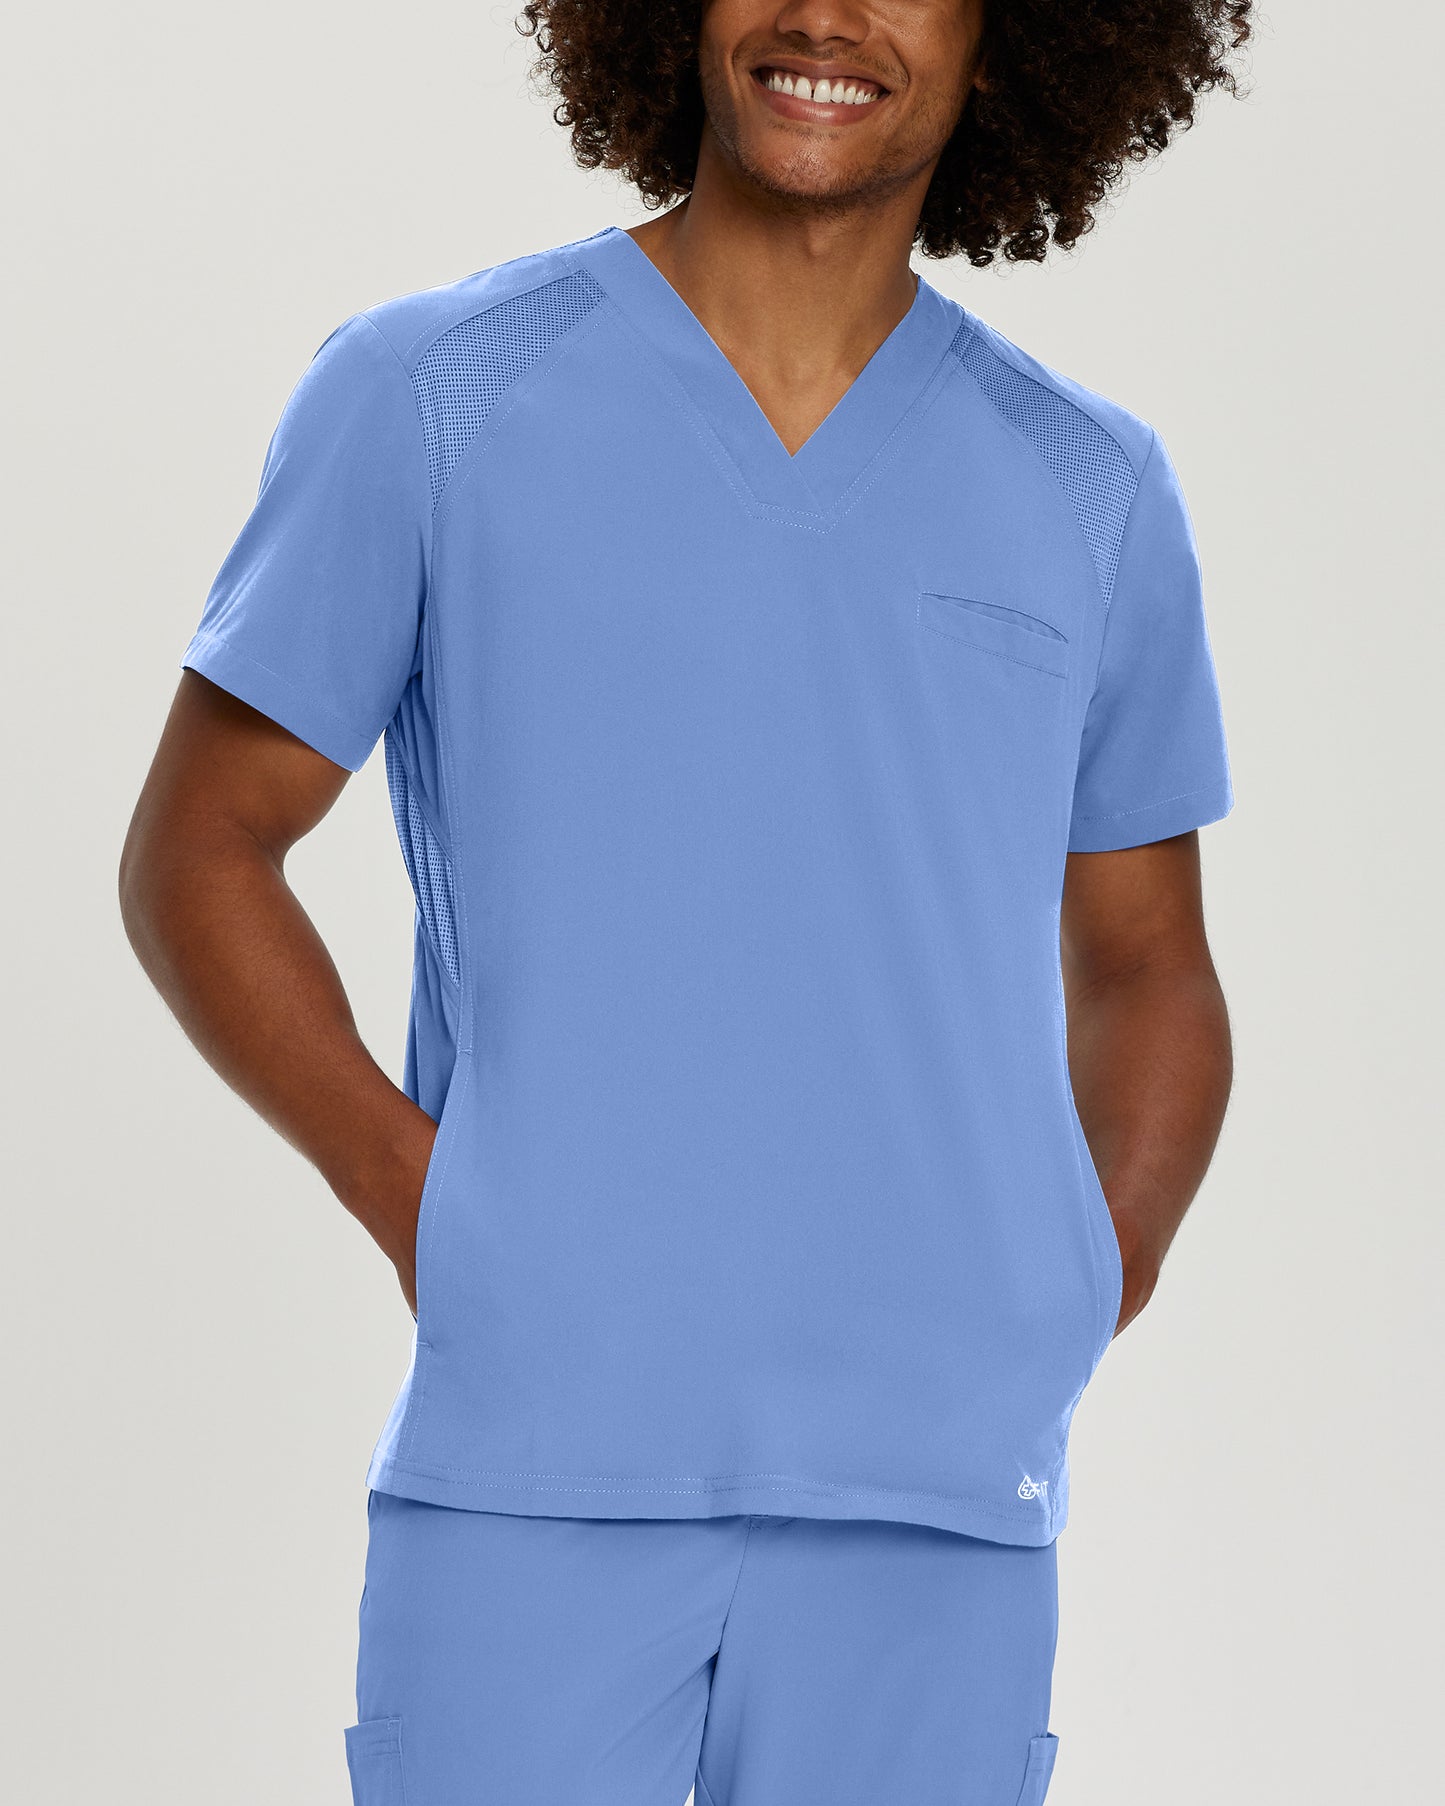 Men's V-neck top with three pockets - FIT - 2266